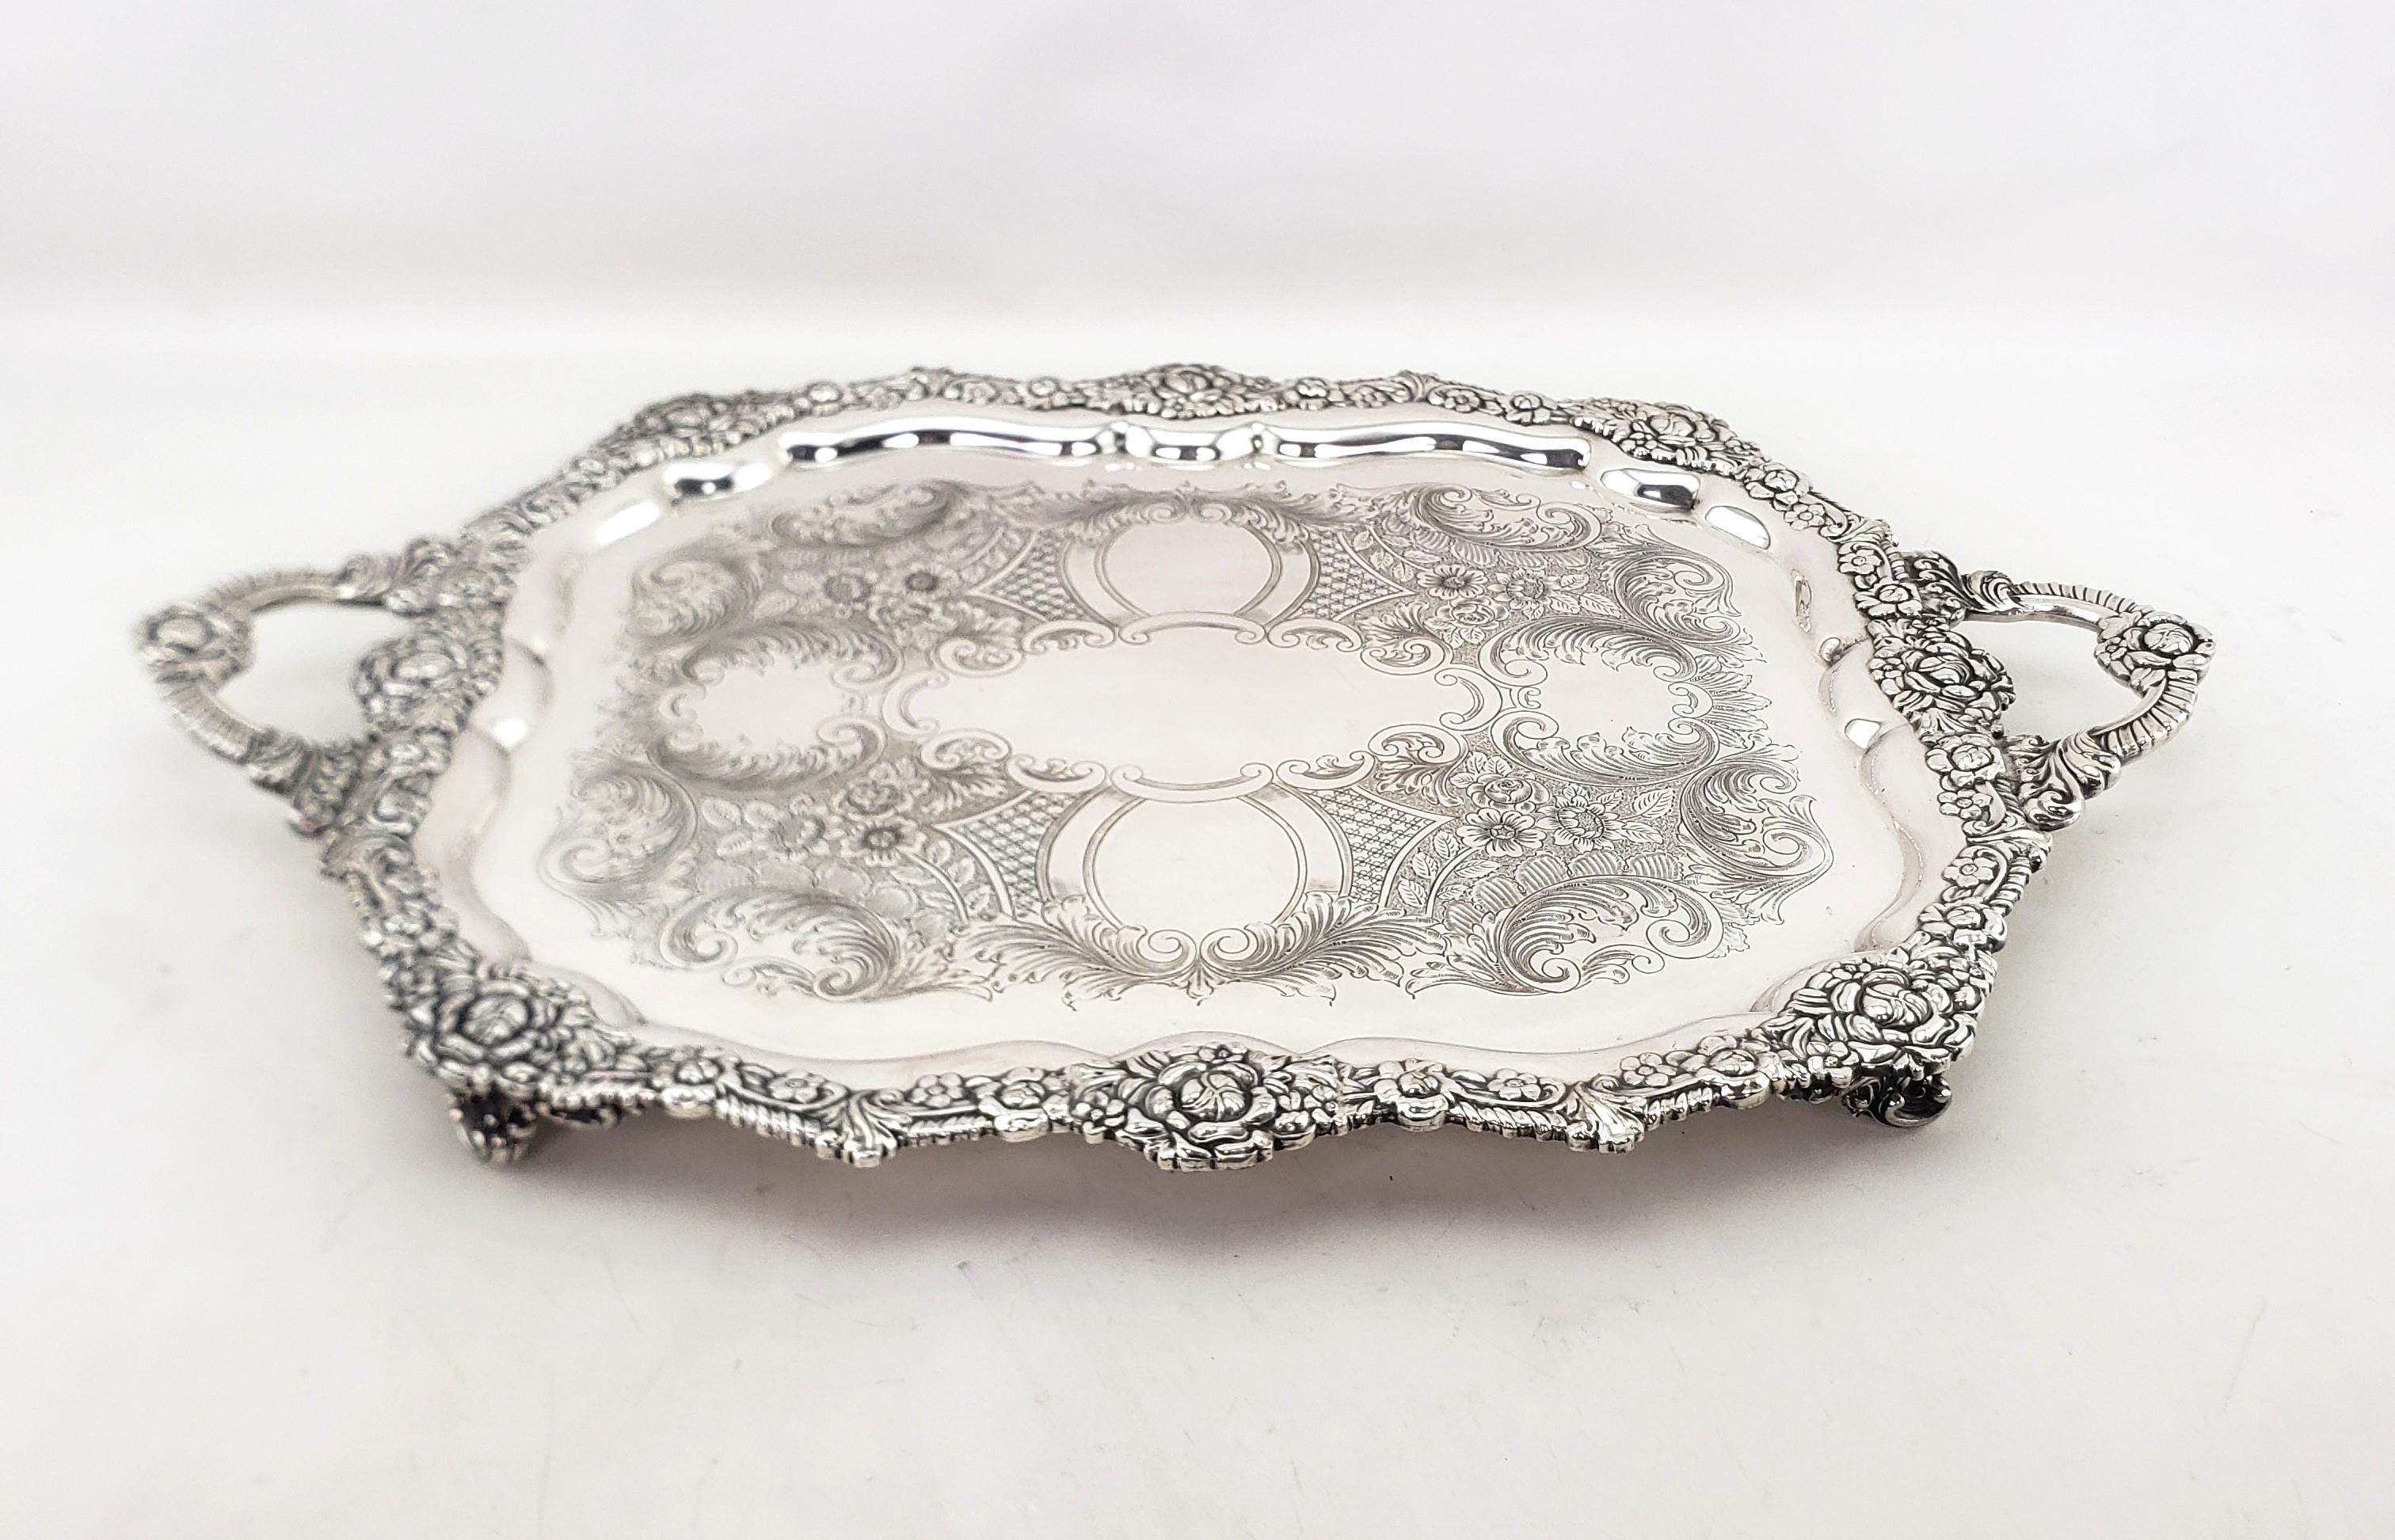 Large Antique English Silver Plated Serving Tray with Ornate Floral Decoration In Good Condition For Sale In Hamilton, Ontario